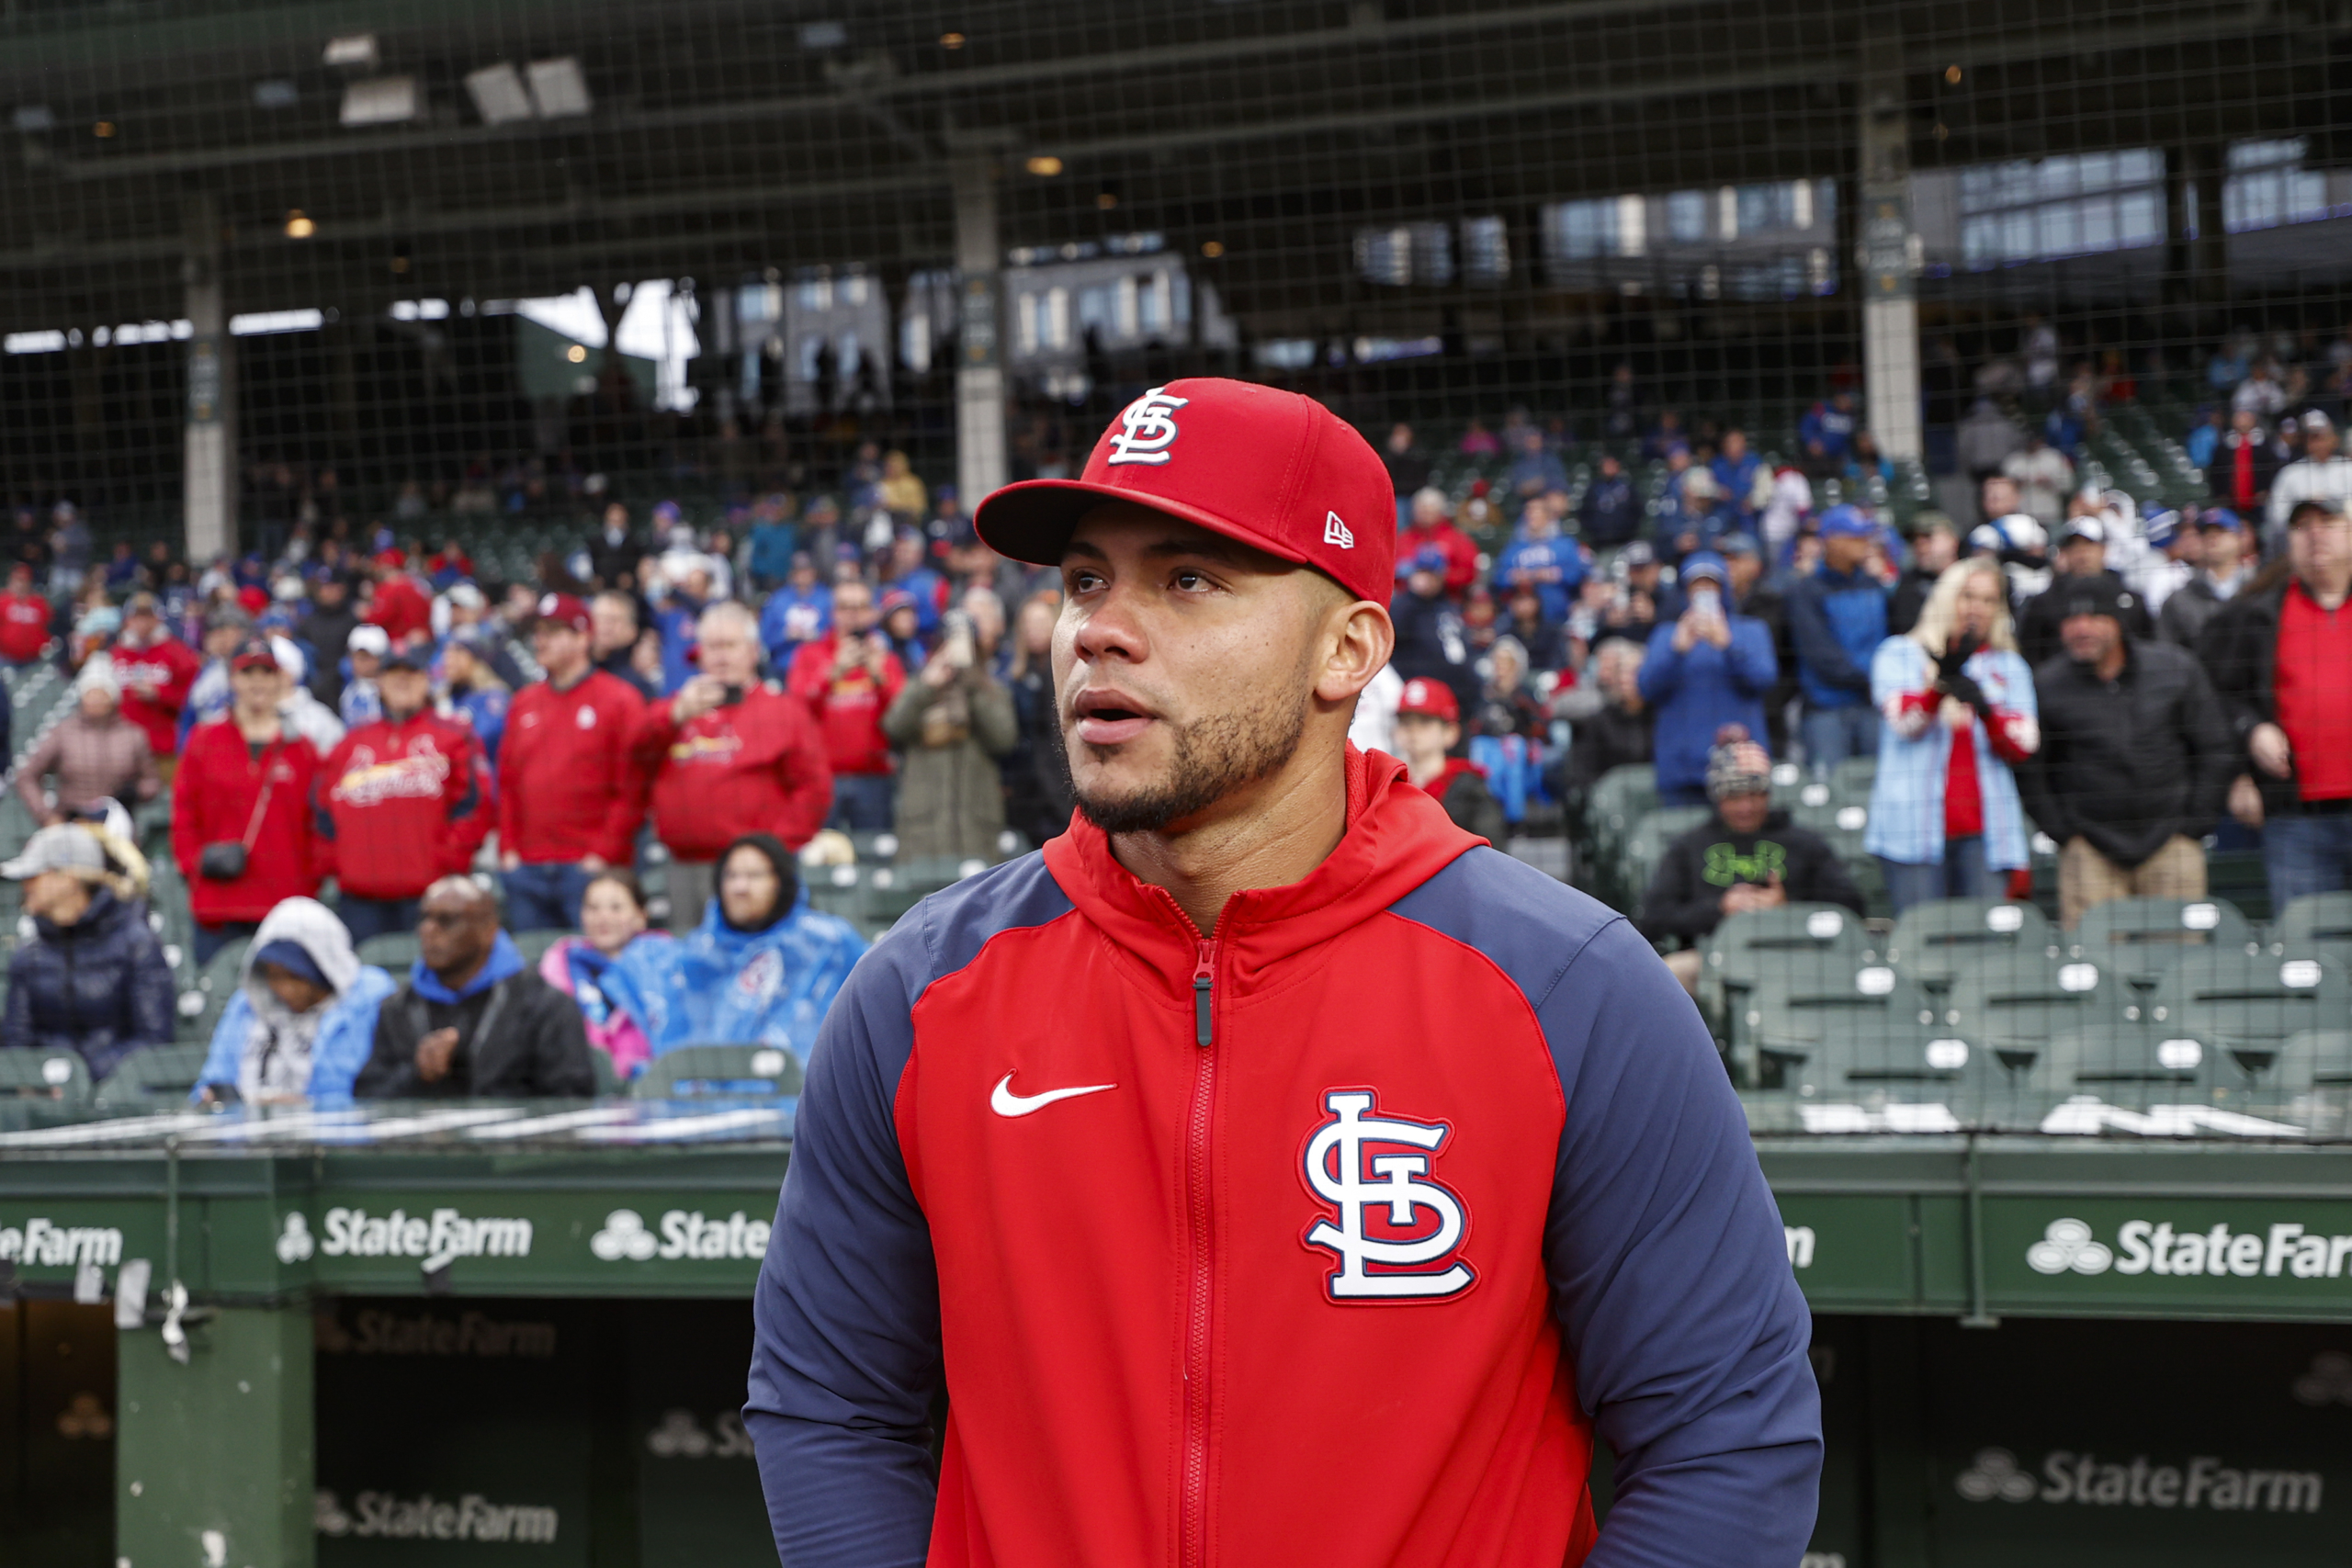 Contreras back at Wrigley, this time as Cardinals DH